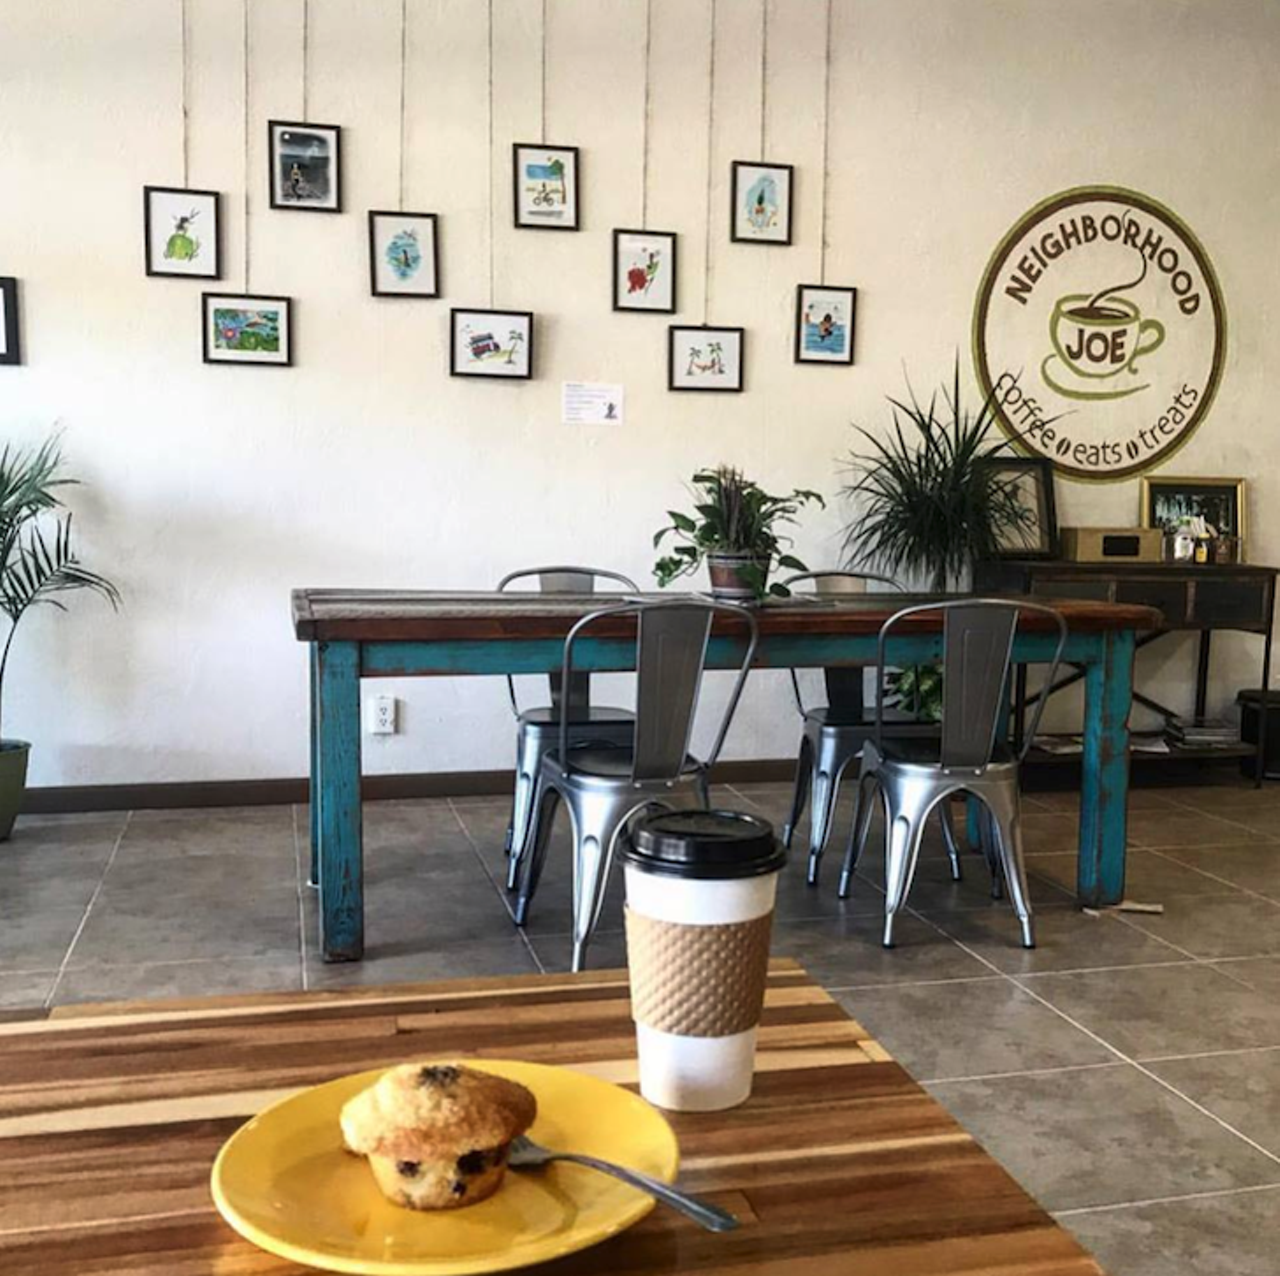 Neighborhood Joe  
2609 Dr. MLK Jr. St. N. St. Pete, 727-290-9241
Don&#146;t blind or you might miss it. This small cafe has bites to go along with your cup of joe. Fair warning - you might need to get a little creative when it comes to parking.
Photo via Neighborhood Joe/Facebook